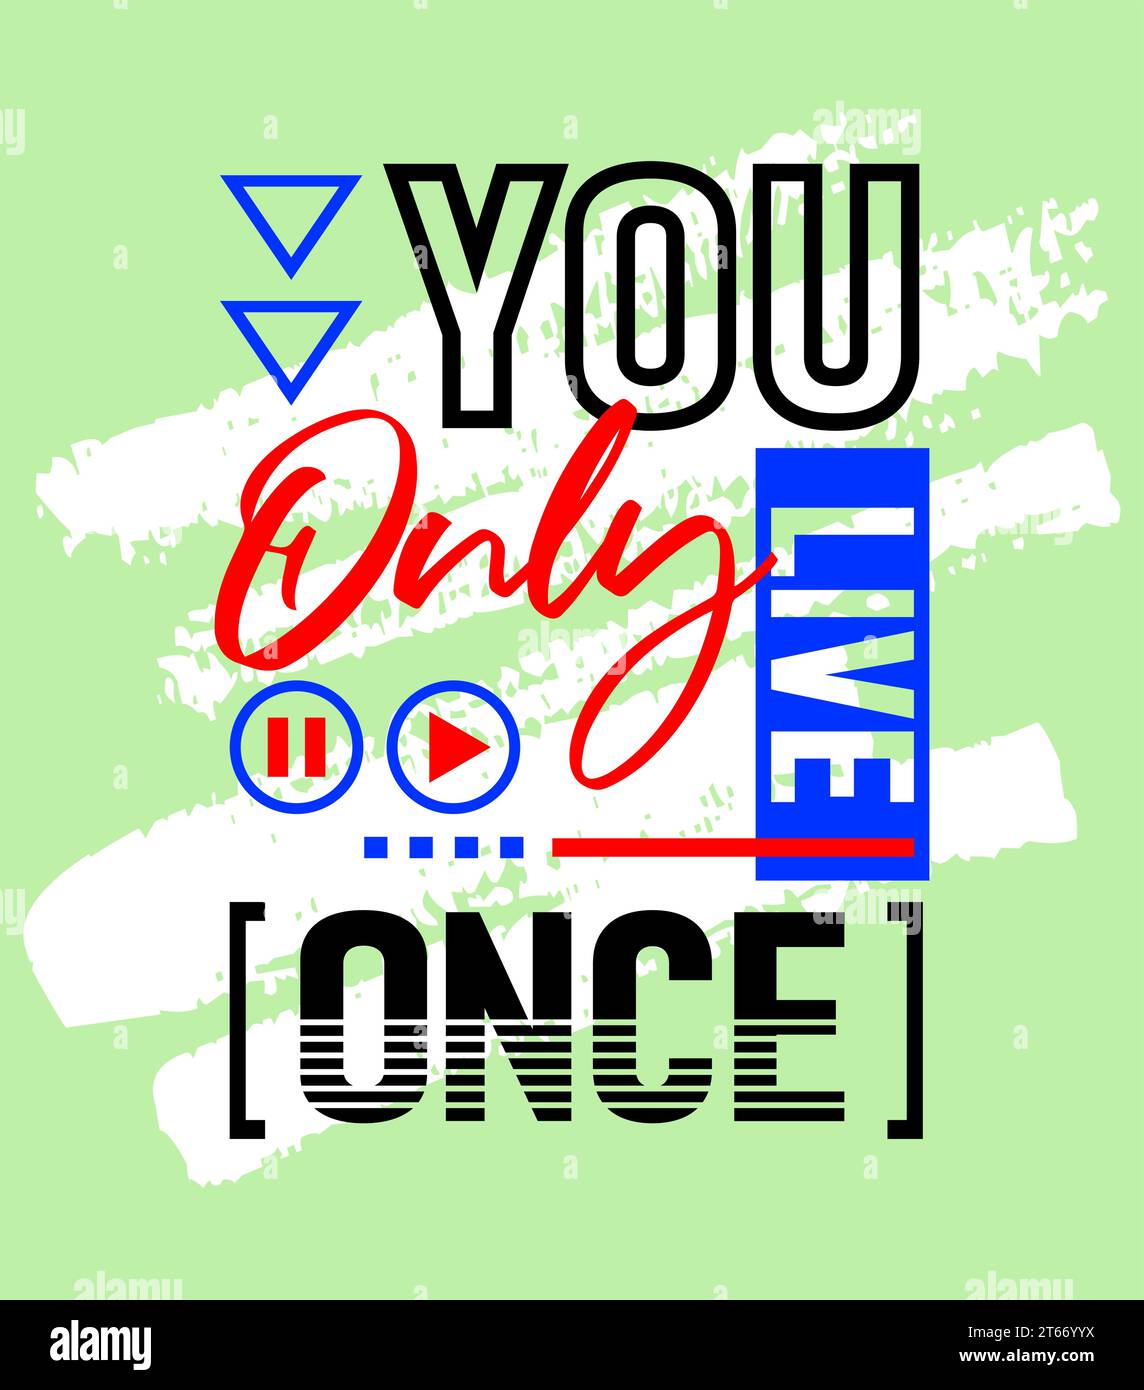 You only live once motivational inspirational quote, Short phrases quotes, typography, slogan grunge Stock Vector